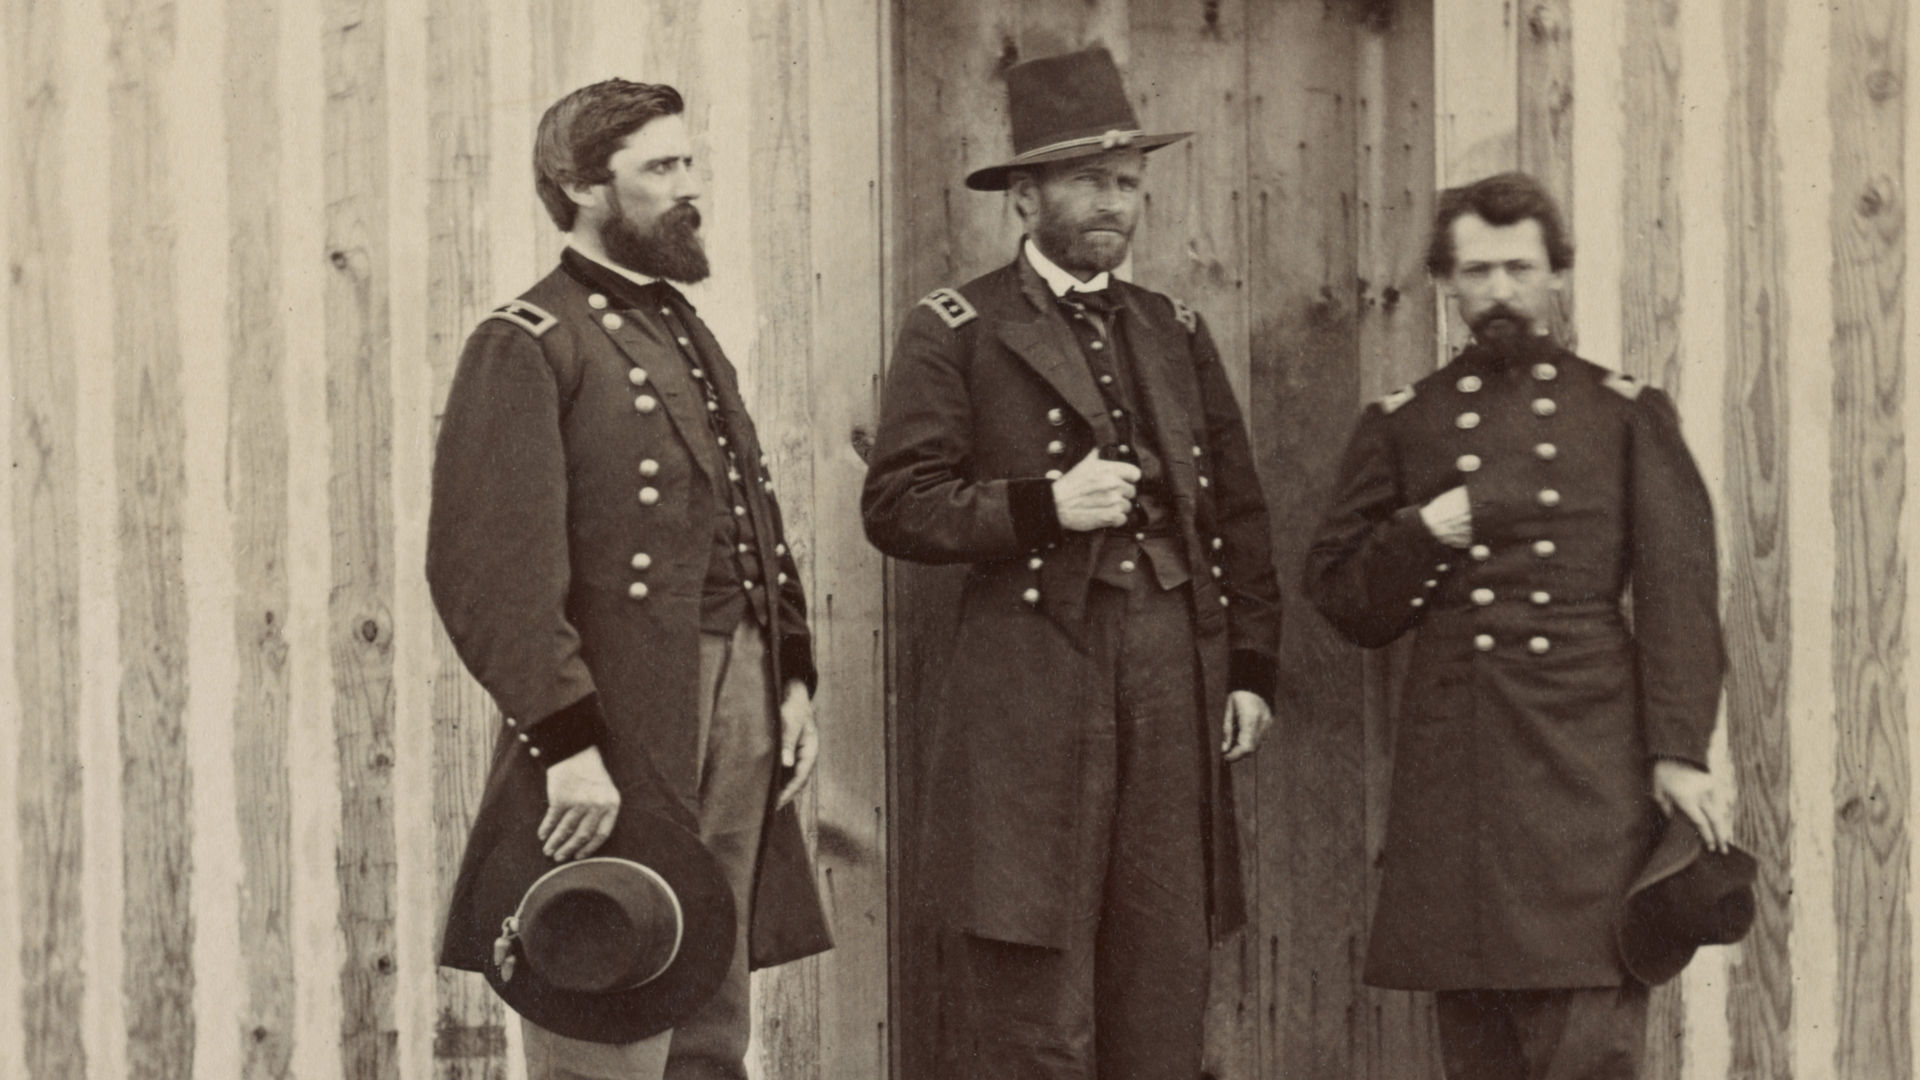 7 Reasons Ulysses S. Grant Was One of America’s Most Brilliant Military Leaders